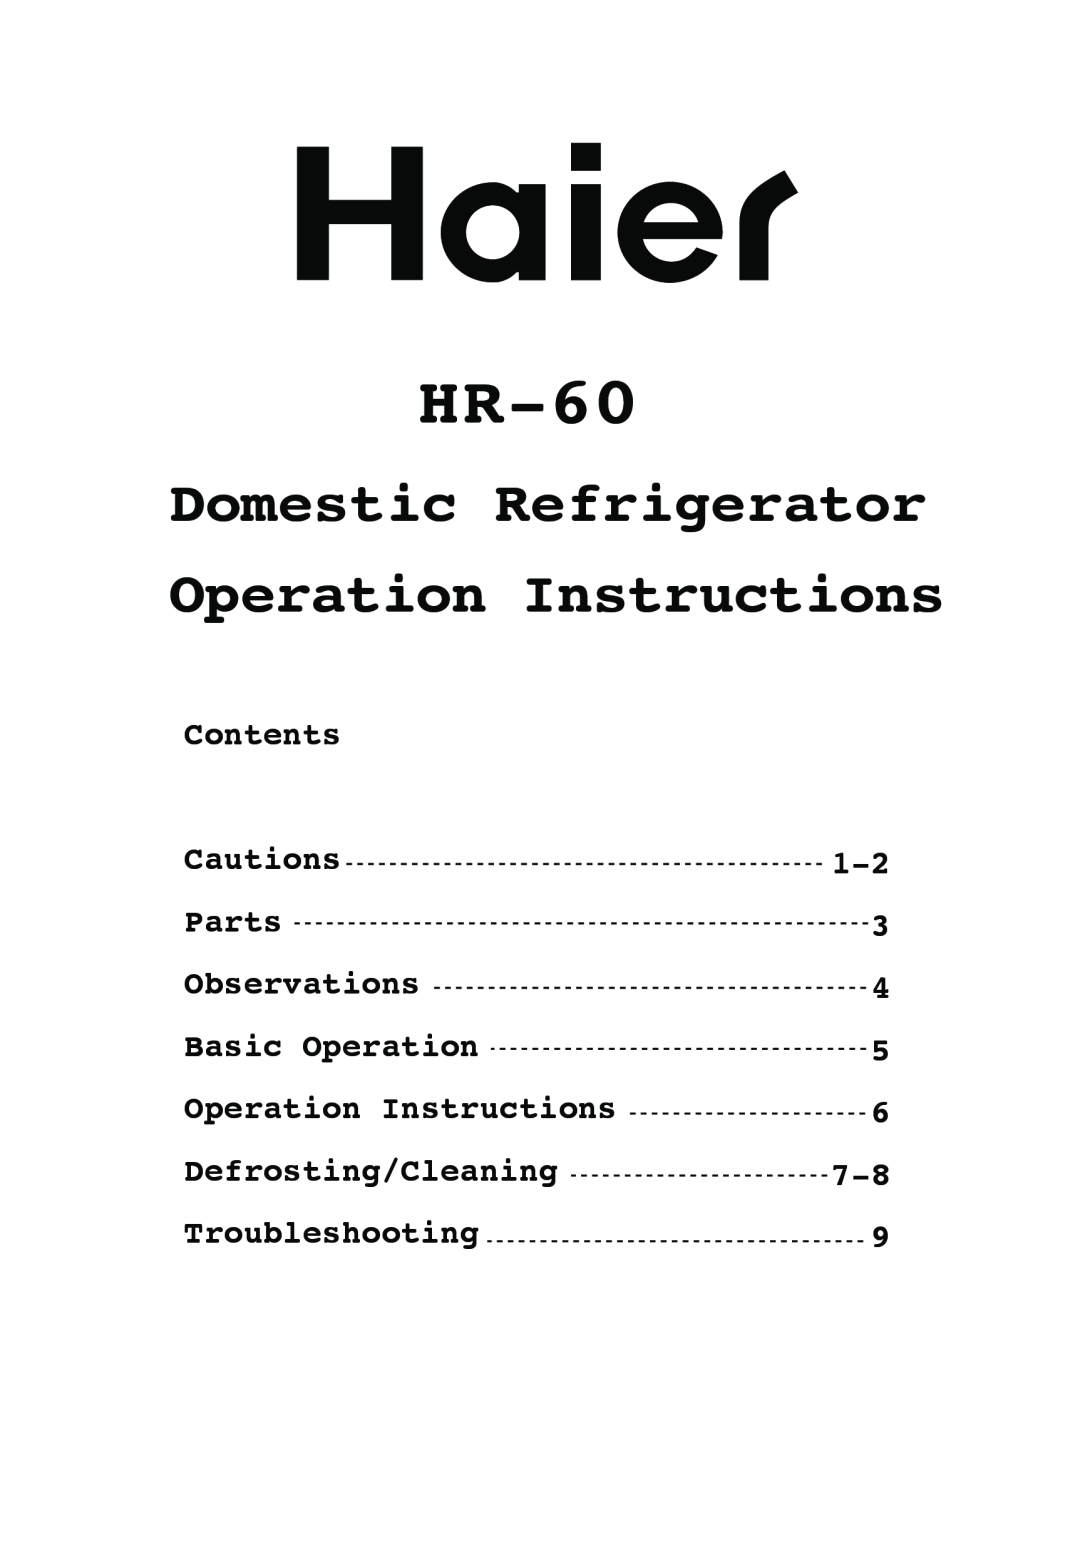 Haier HR-60 manual Domestic Refrigerator Operation Instructions, Contents Cautions Parts Observations Basic Operation 